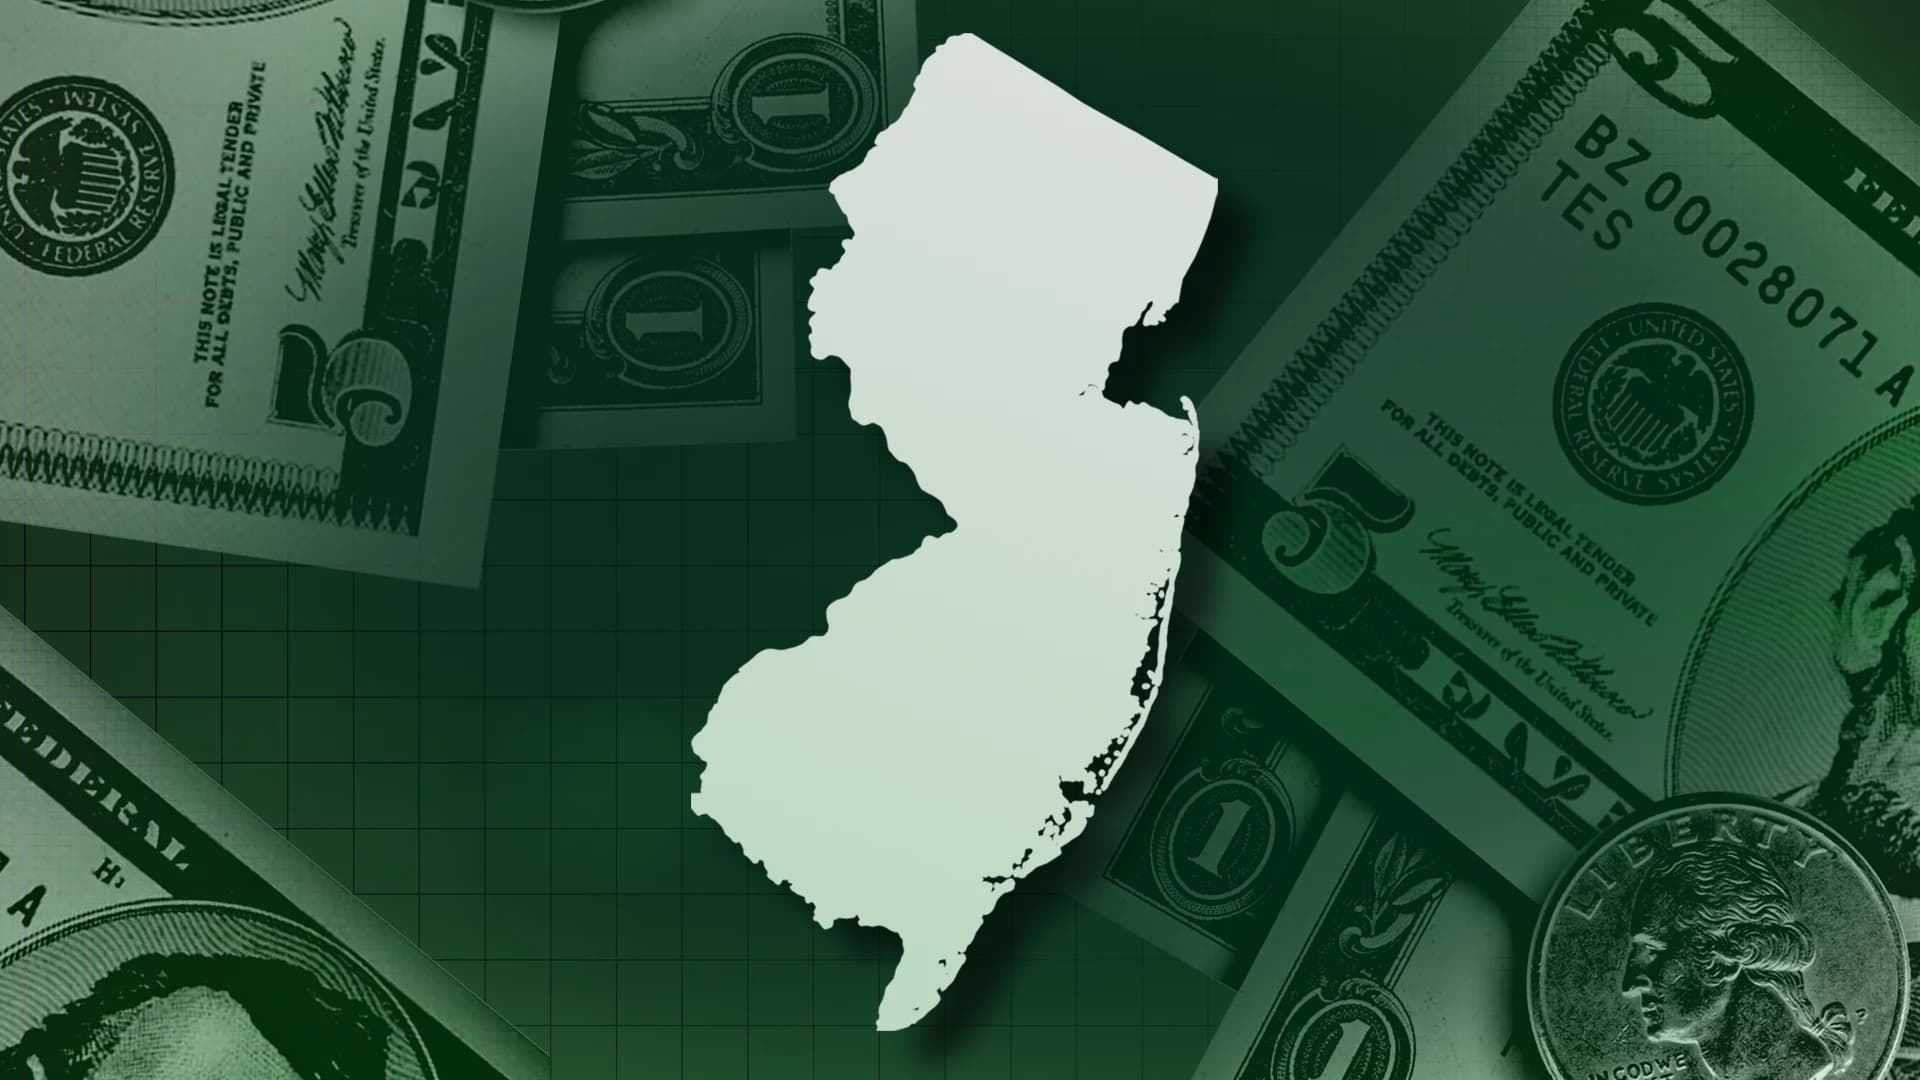 New Jersey gets federal grants to make urban areas greener